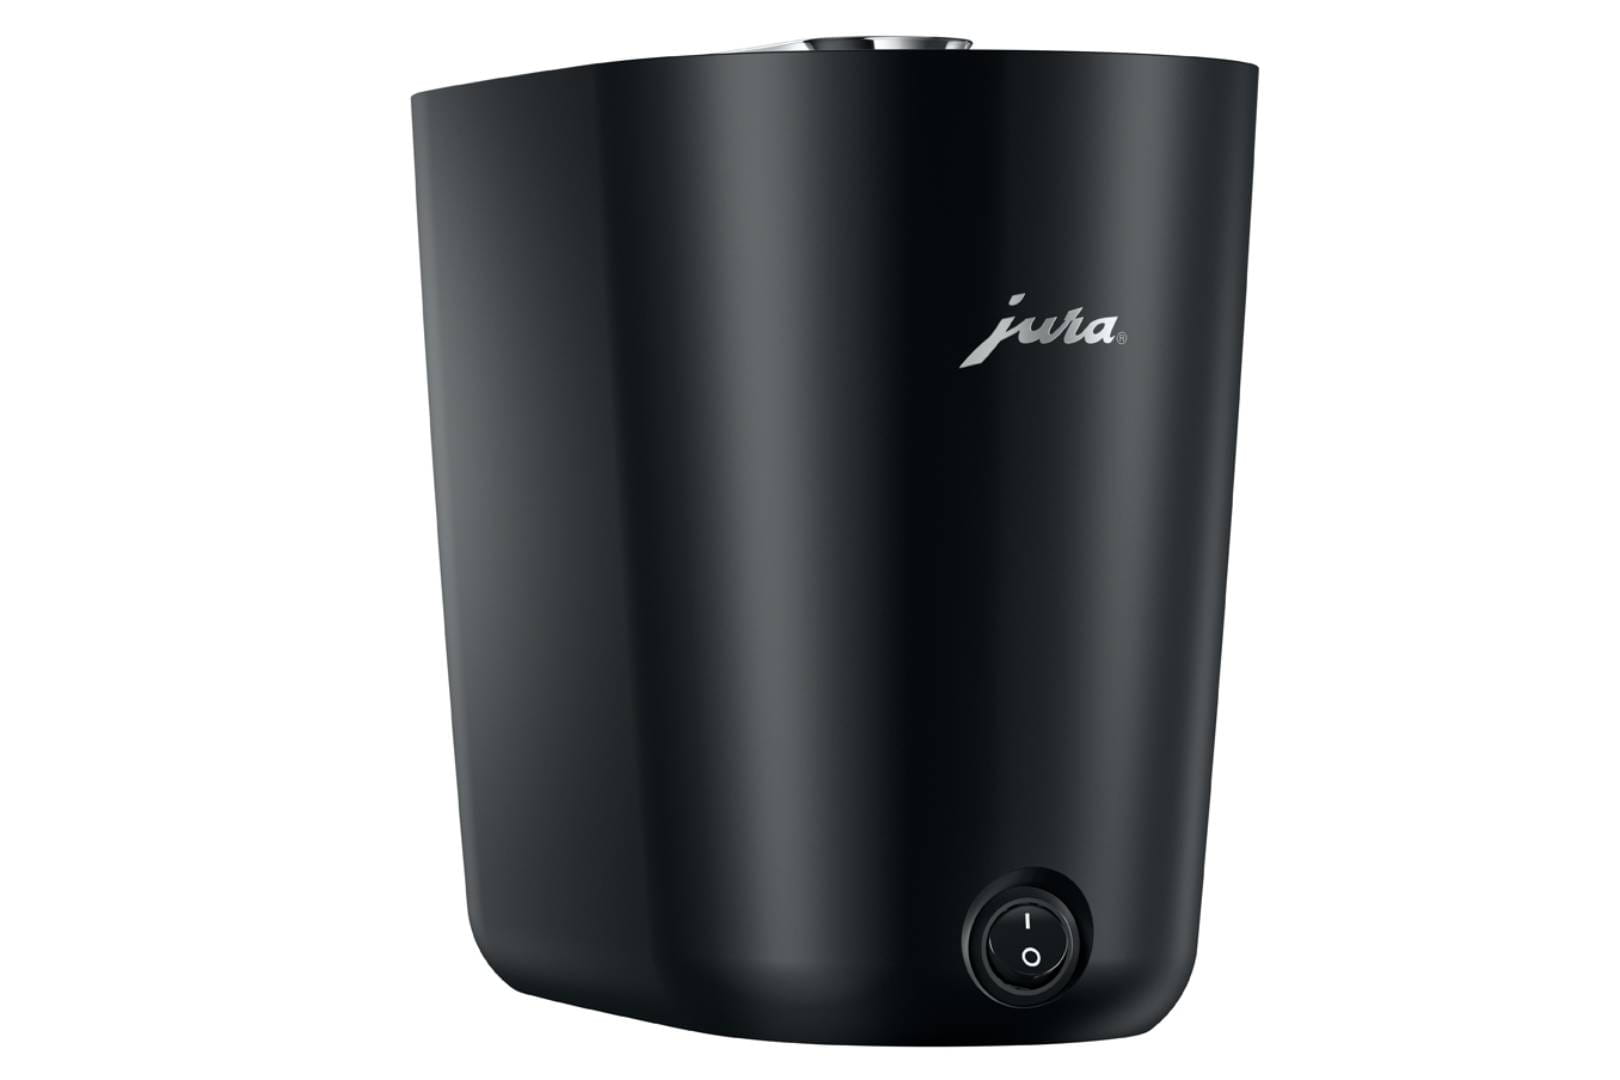 https://www.jura.com/-/media/global/images/home-products/accessories/CupWarmer-S/black/image-gallery/cupwarmer_s_image3.jpg